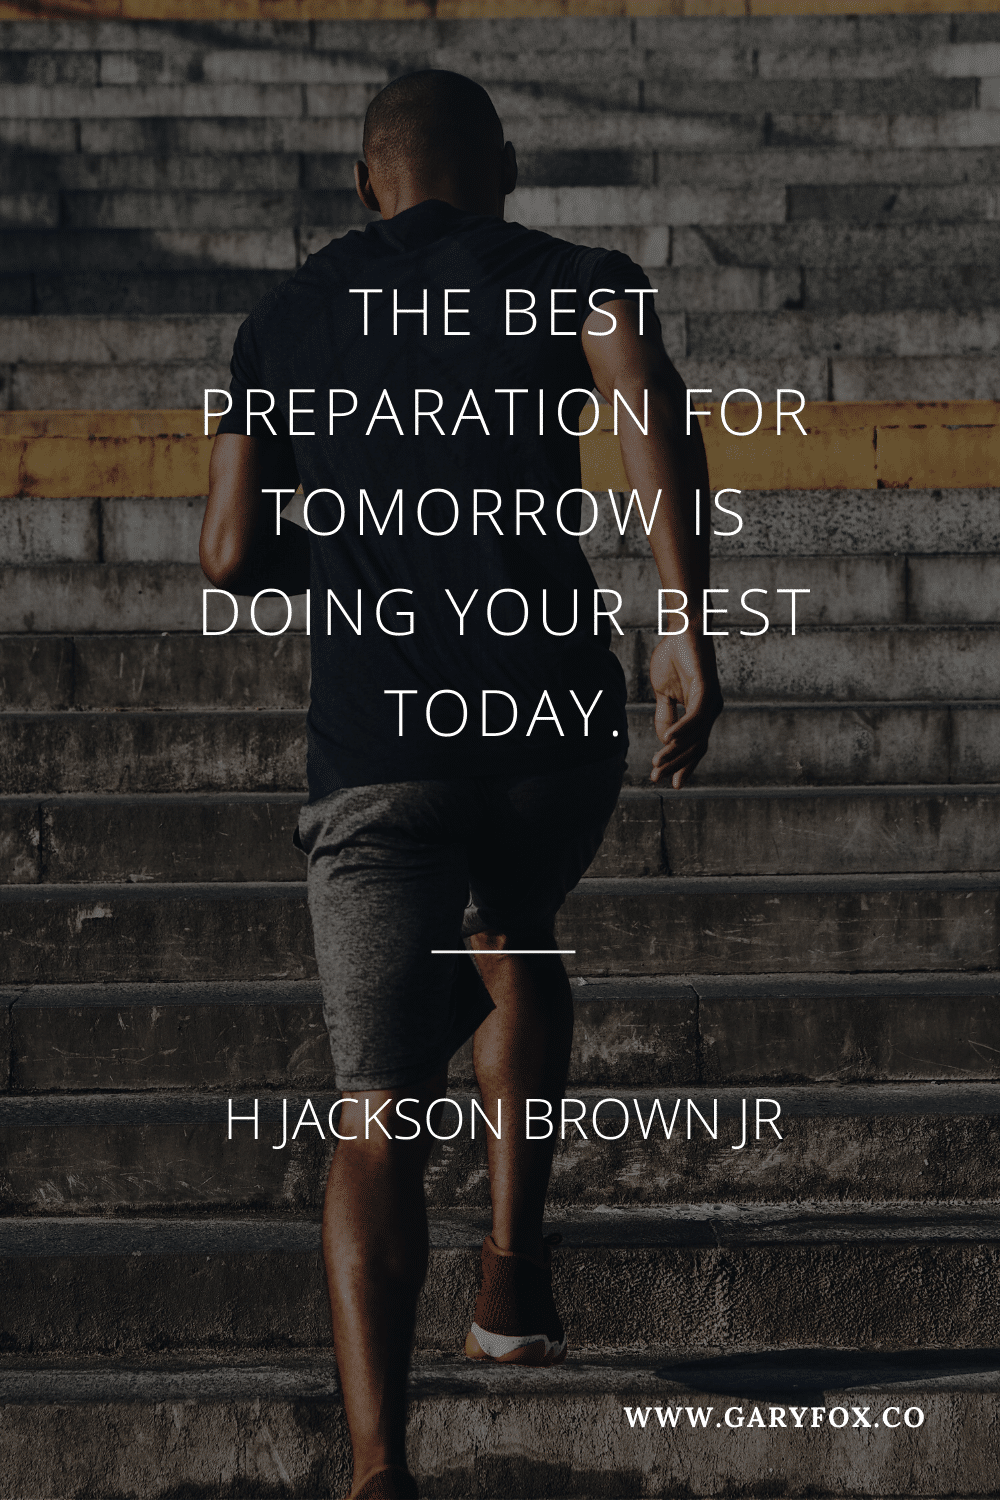 The Best Preparation For Tomorrow Is Doing Your Best Today. H. Jackson Brown Jr